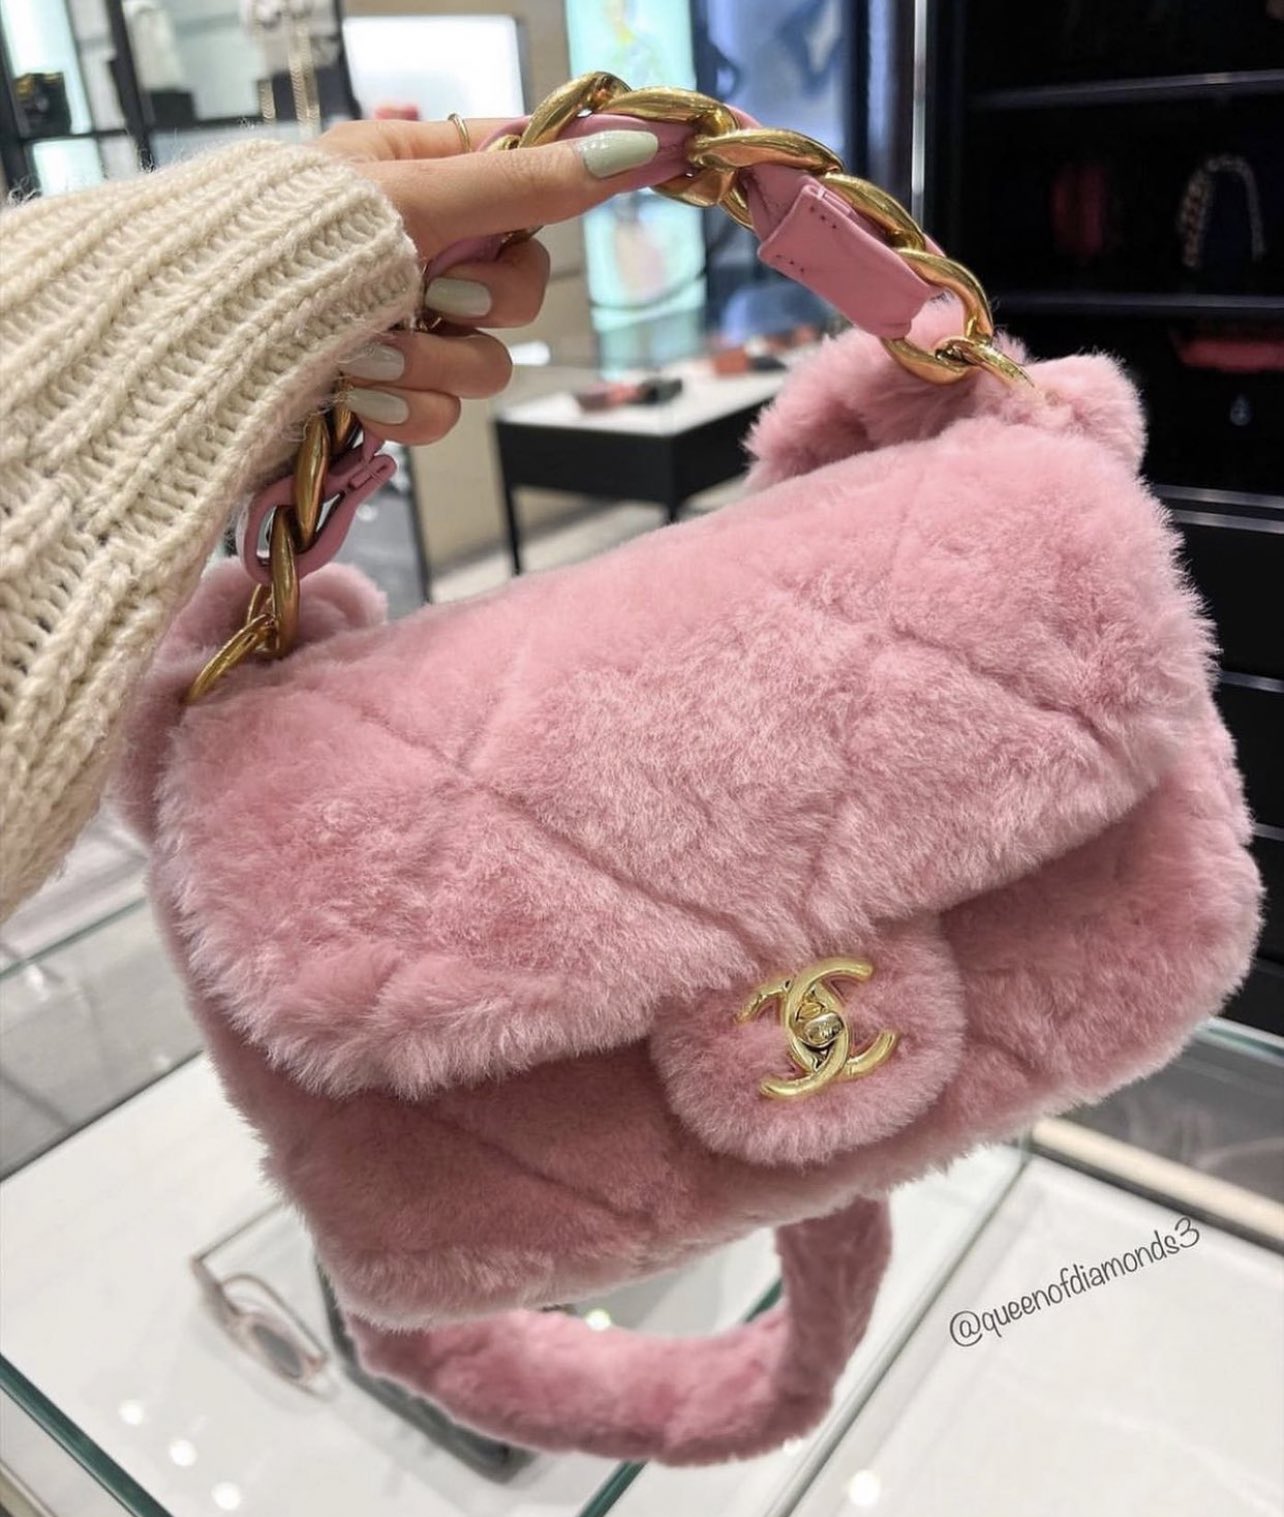 Authentic CHANEL Large Pink Flap Bag with top handle Trendy CC Bag –  AuthenticFab